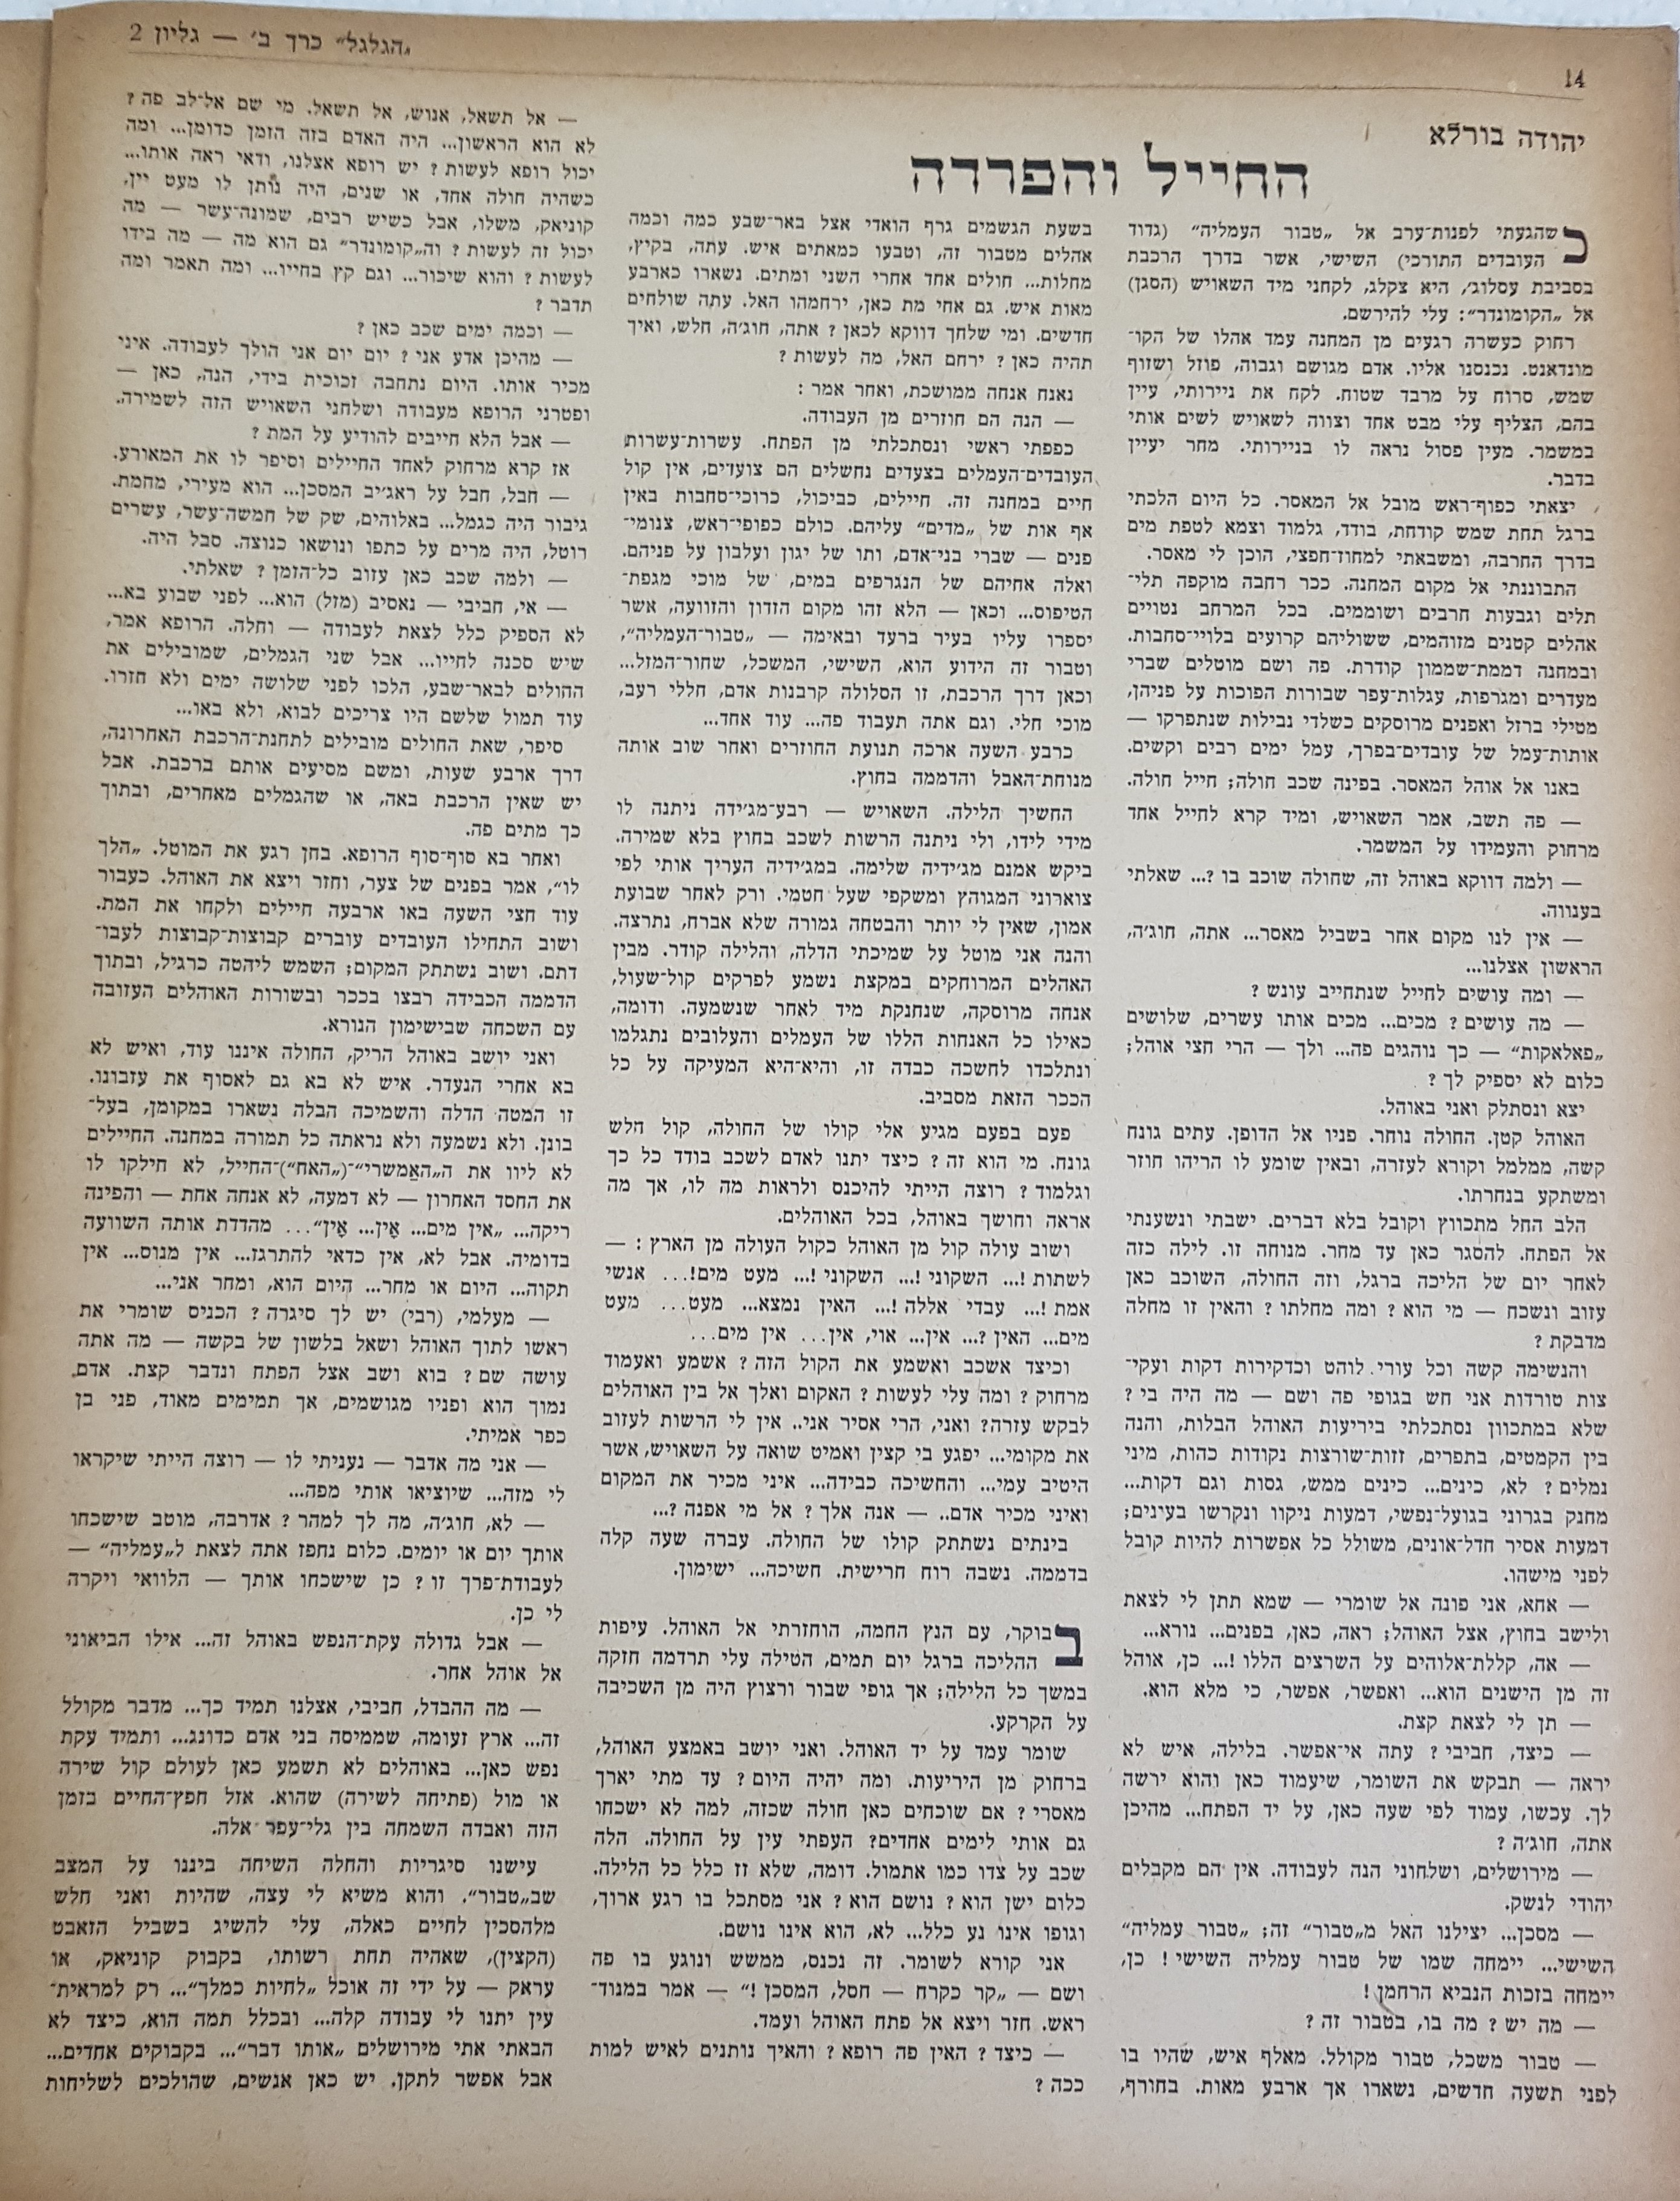   Photo: page 14